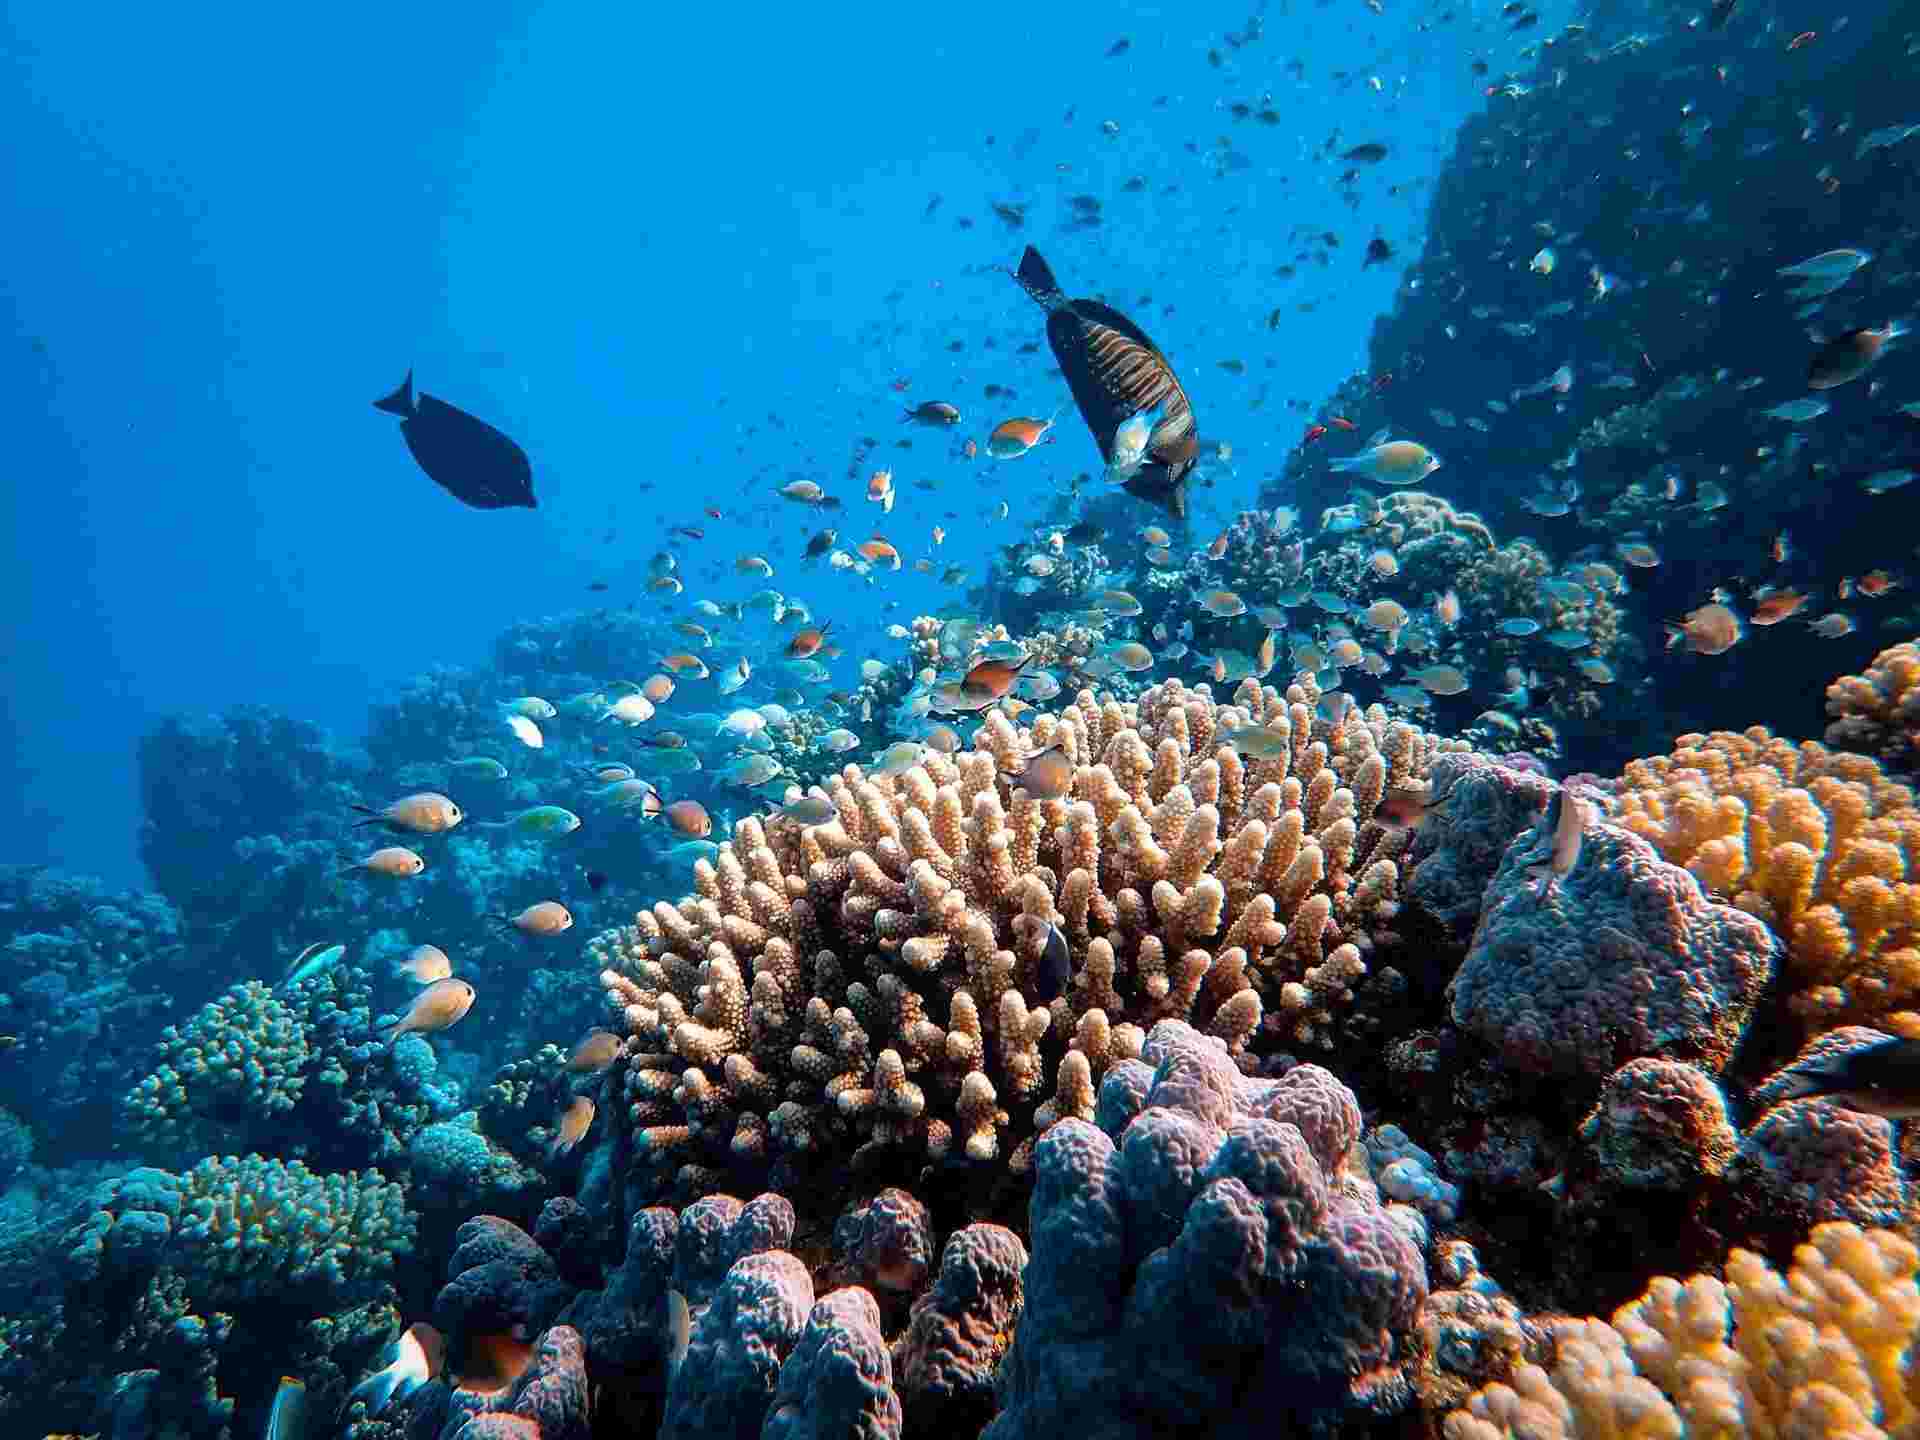 Coral reefs are some of the world's most significant ecosystems